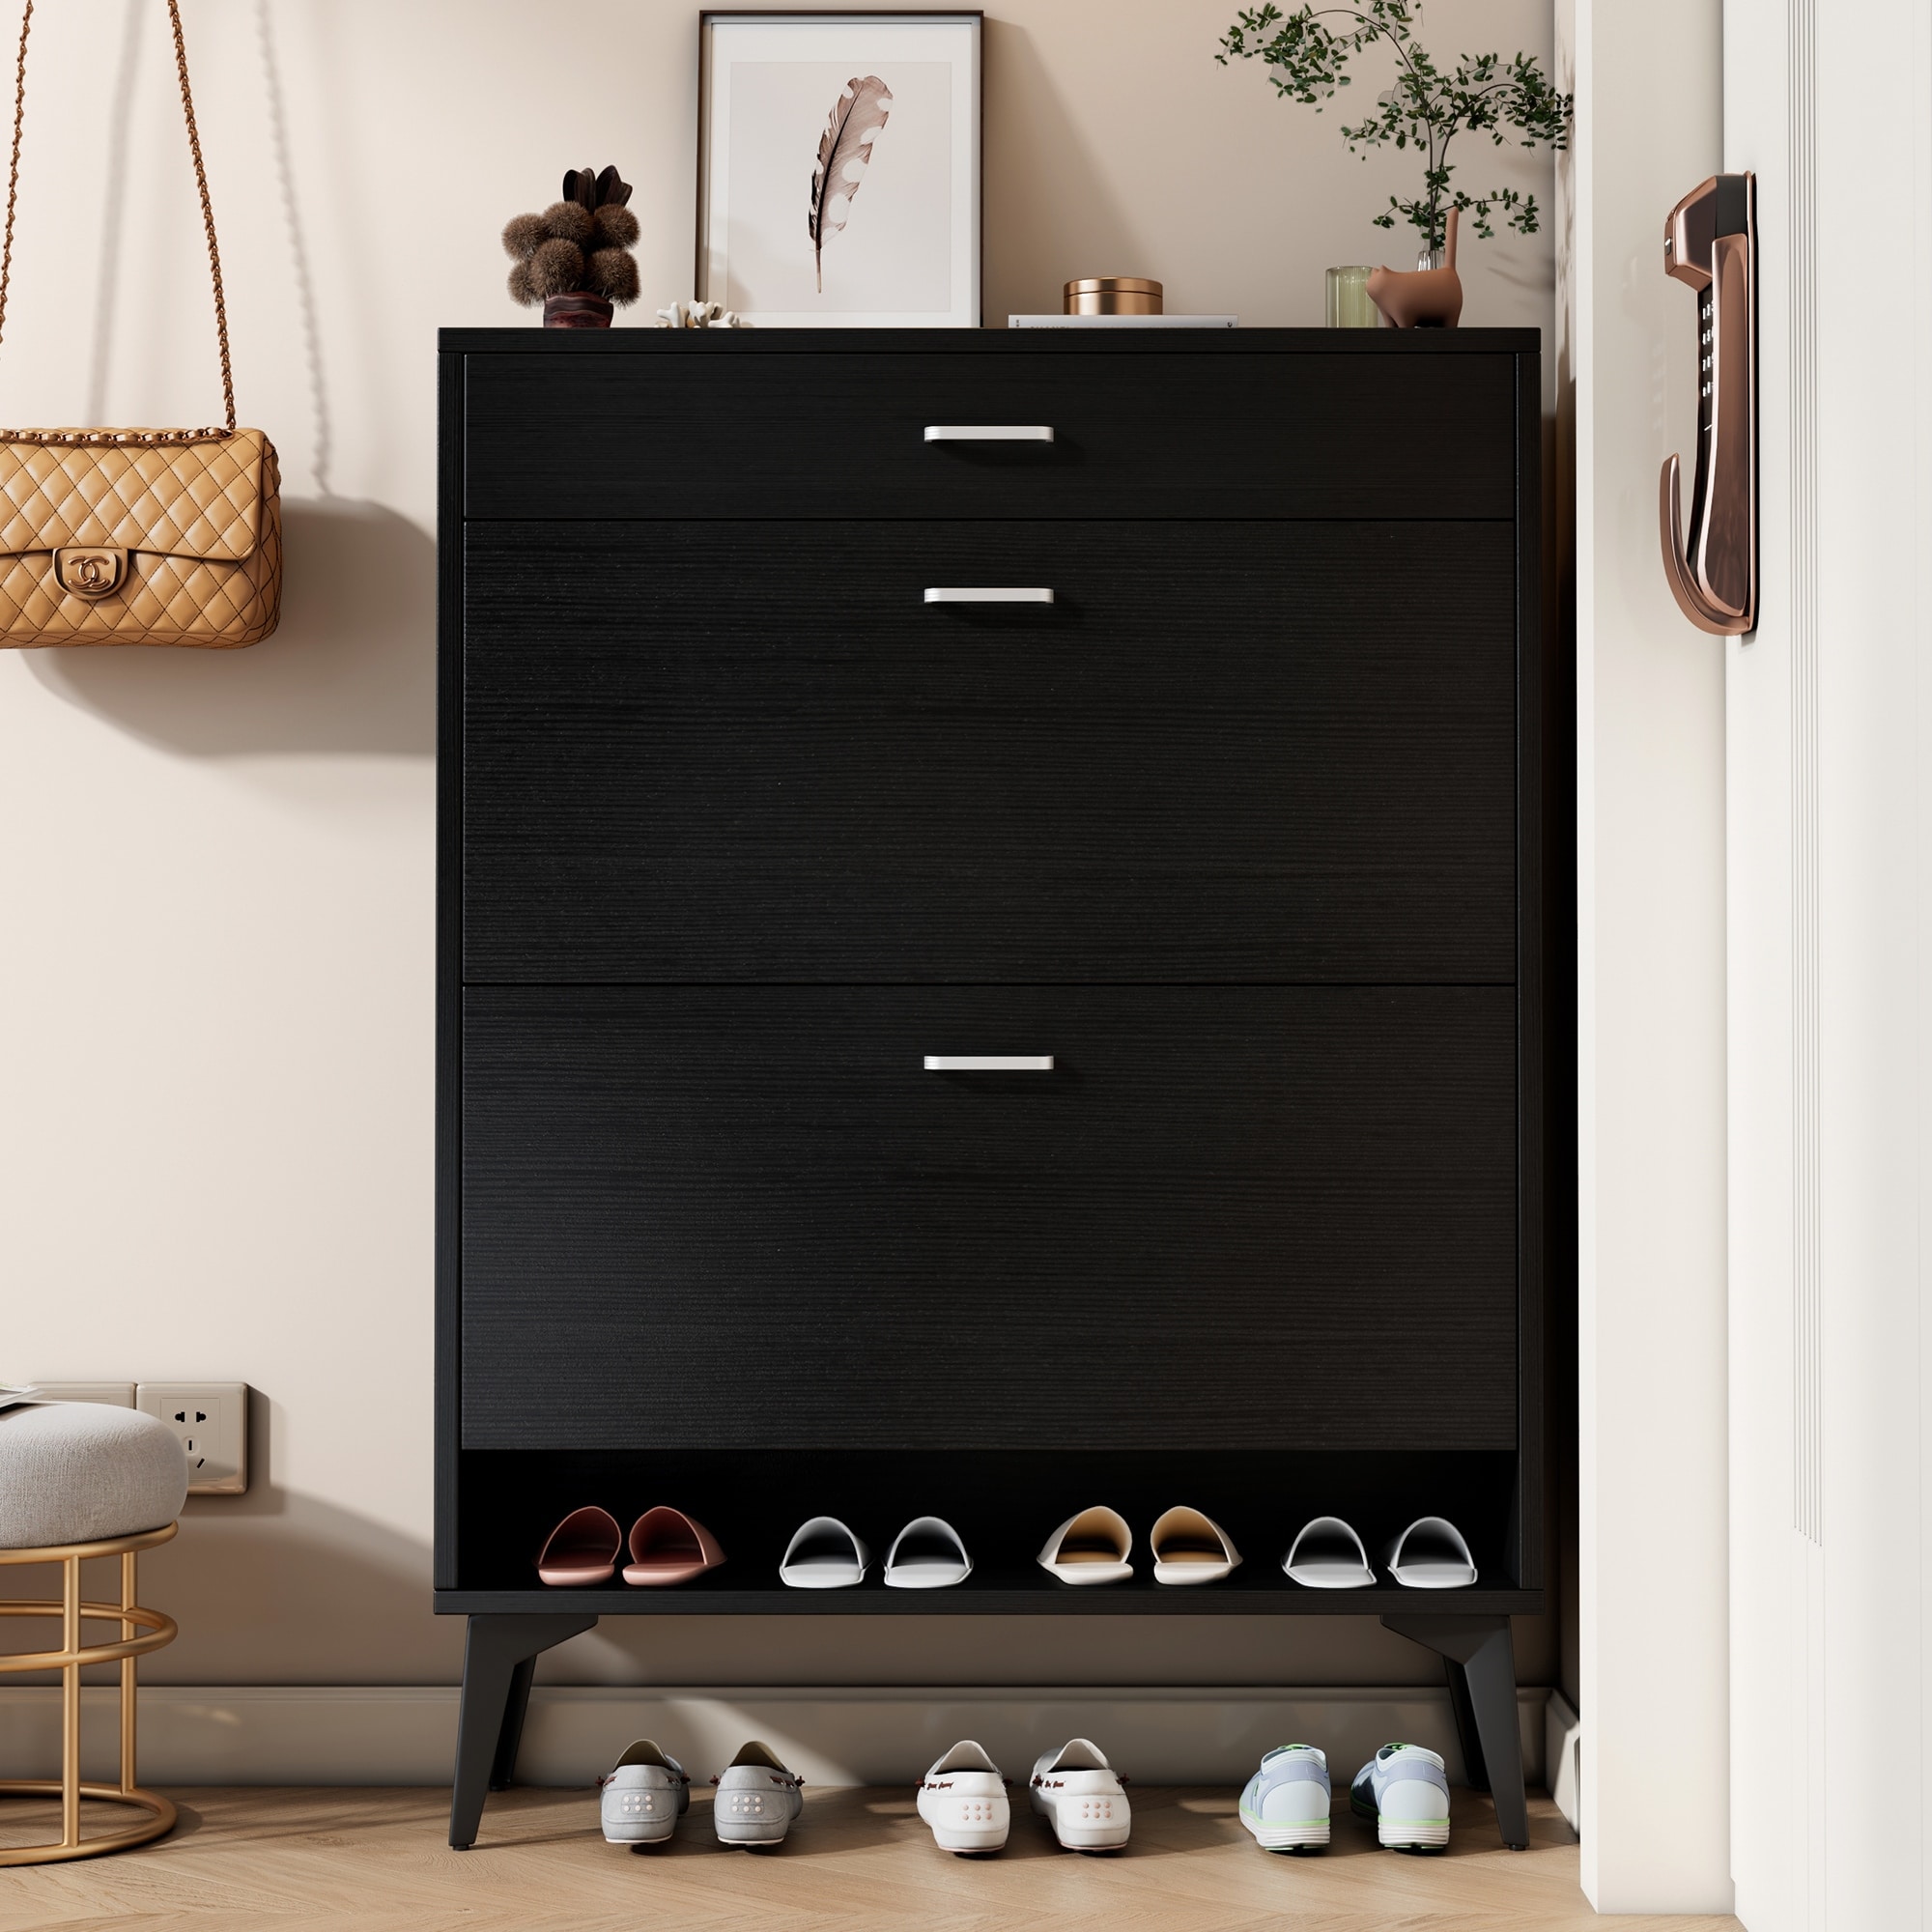 https://ak1.ostkcdn.com/images/products/is/images/direct/d160495b6aa0e31e06d34a739375549317803ae6/Contemporary-Shoe-Cabinet-with-2-Flip-Drawers%2C-2-Tier-Shoe-Storage-Organizer-with-Drawers%2C-Free-Standing-Shoe-Rack-for-Entrance.jpg